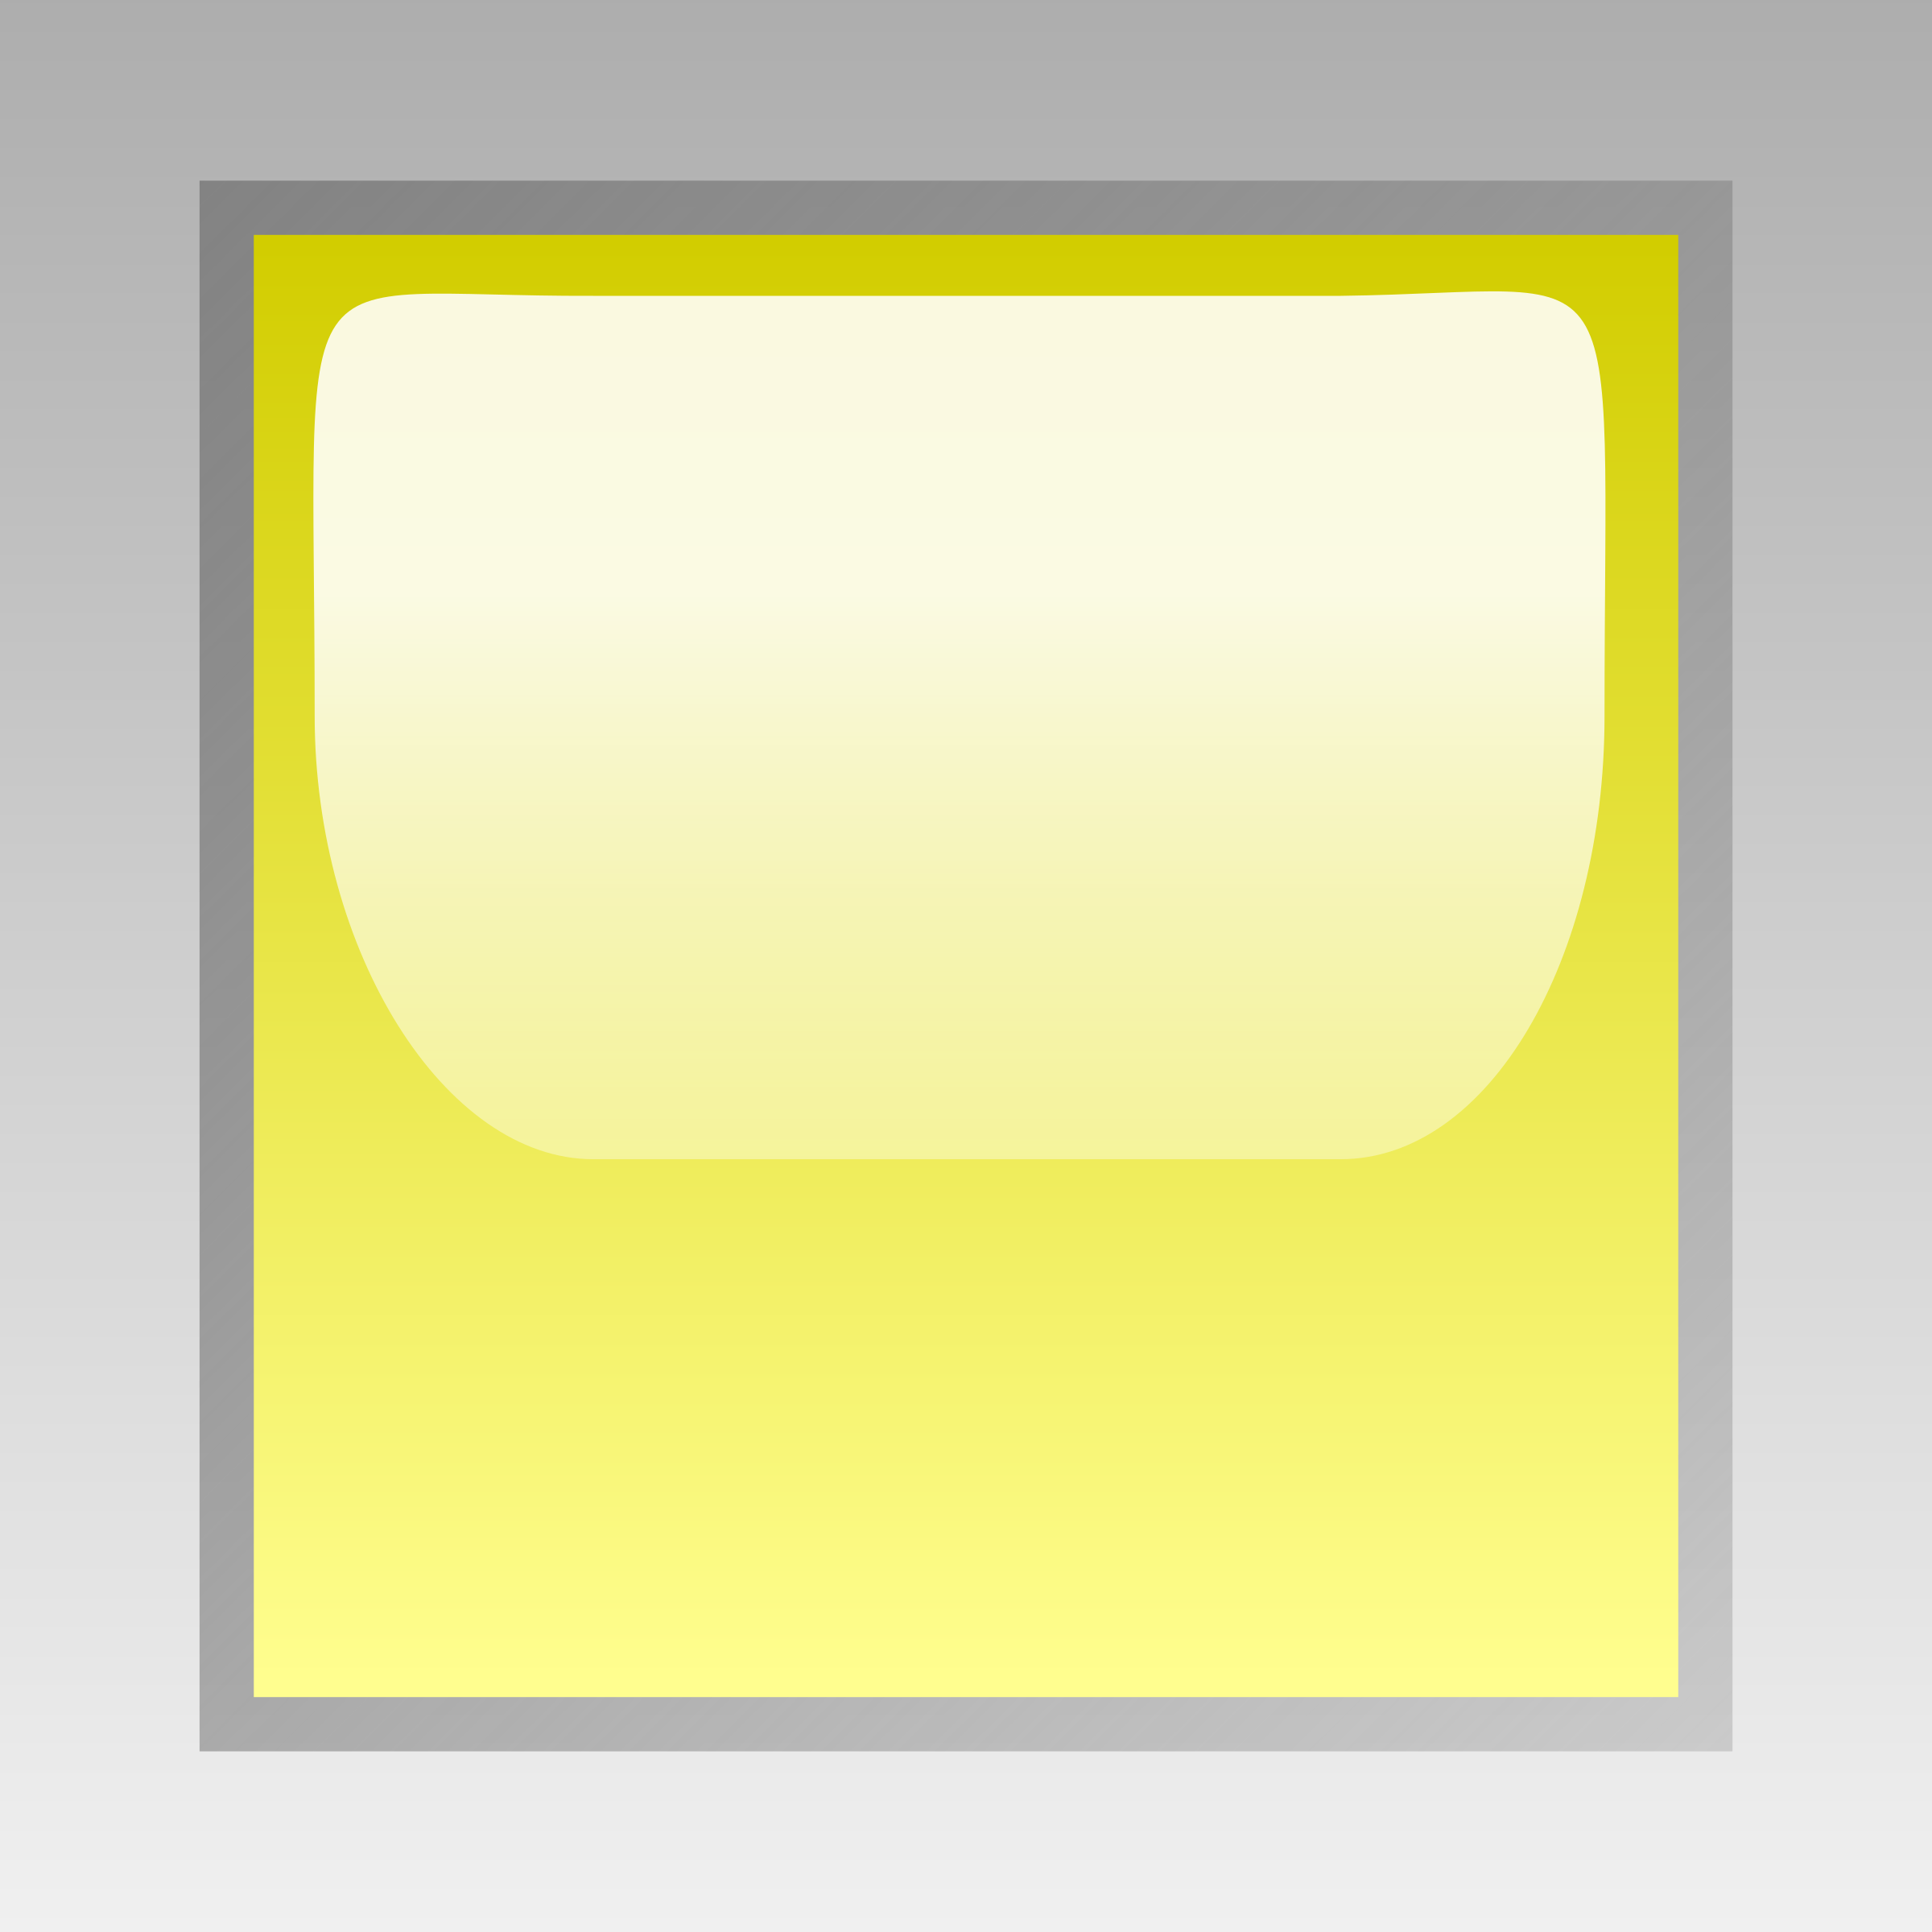 Led Square Yellow By Jean Victor Balin